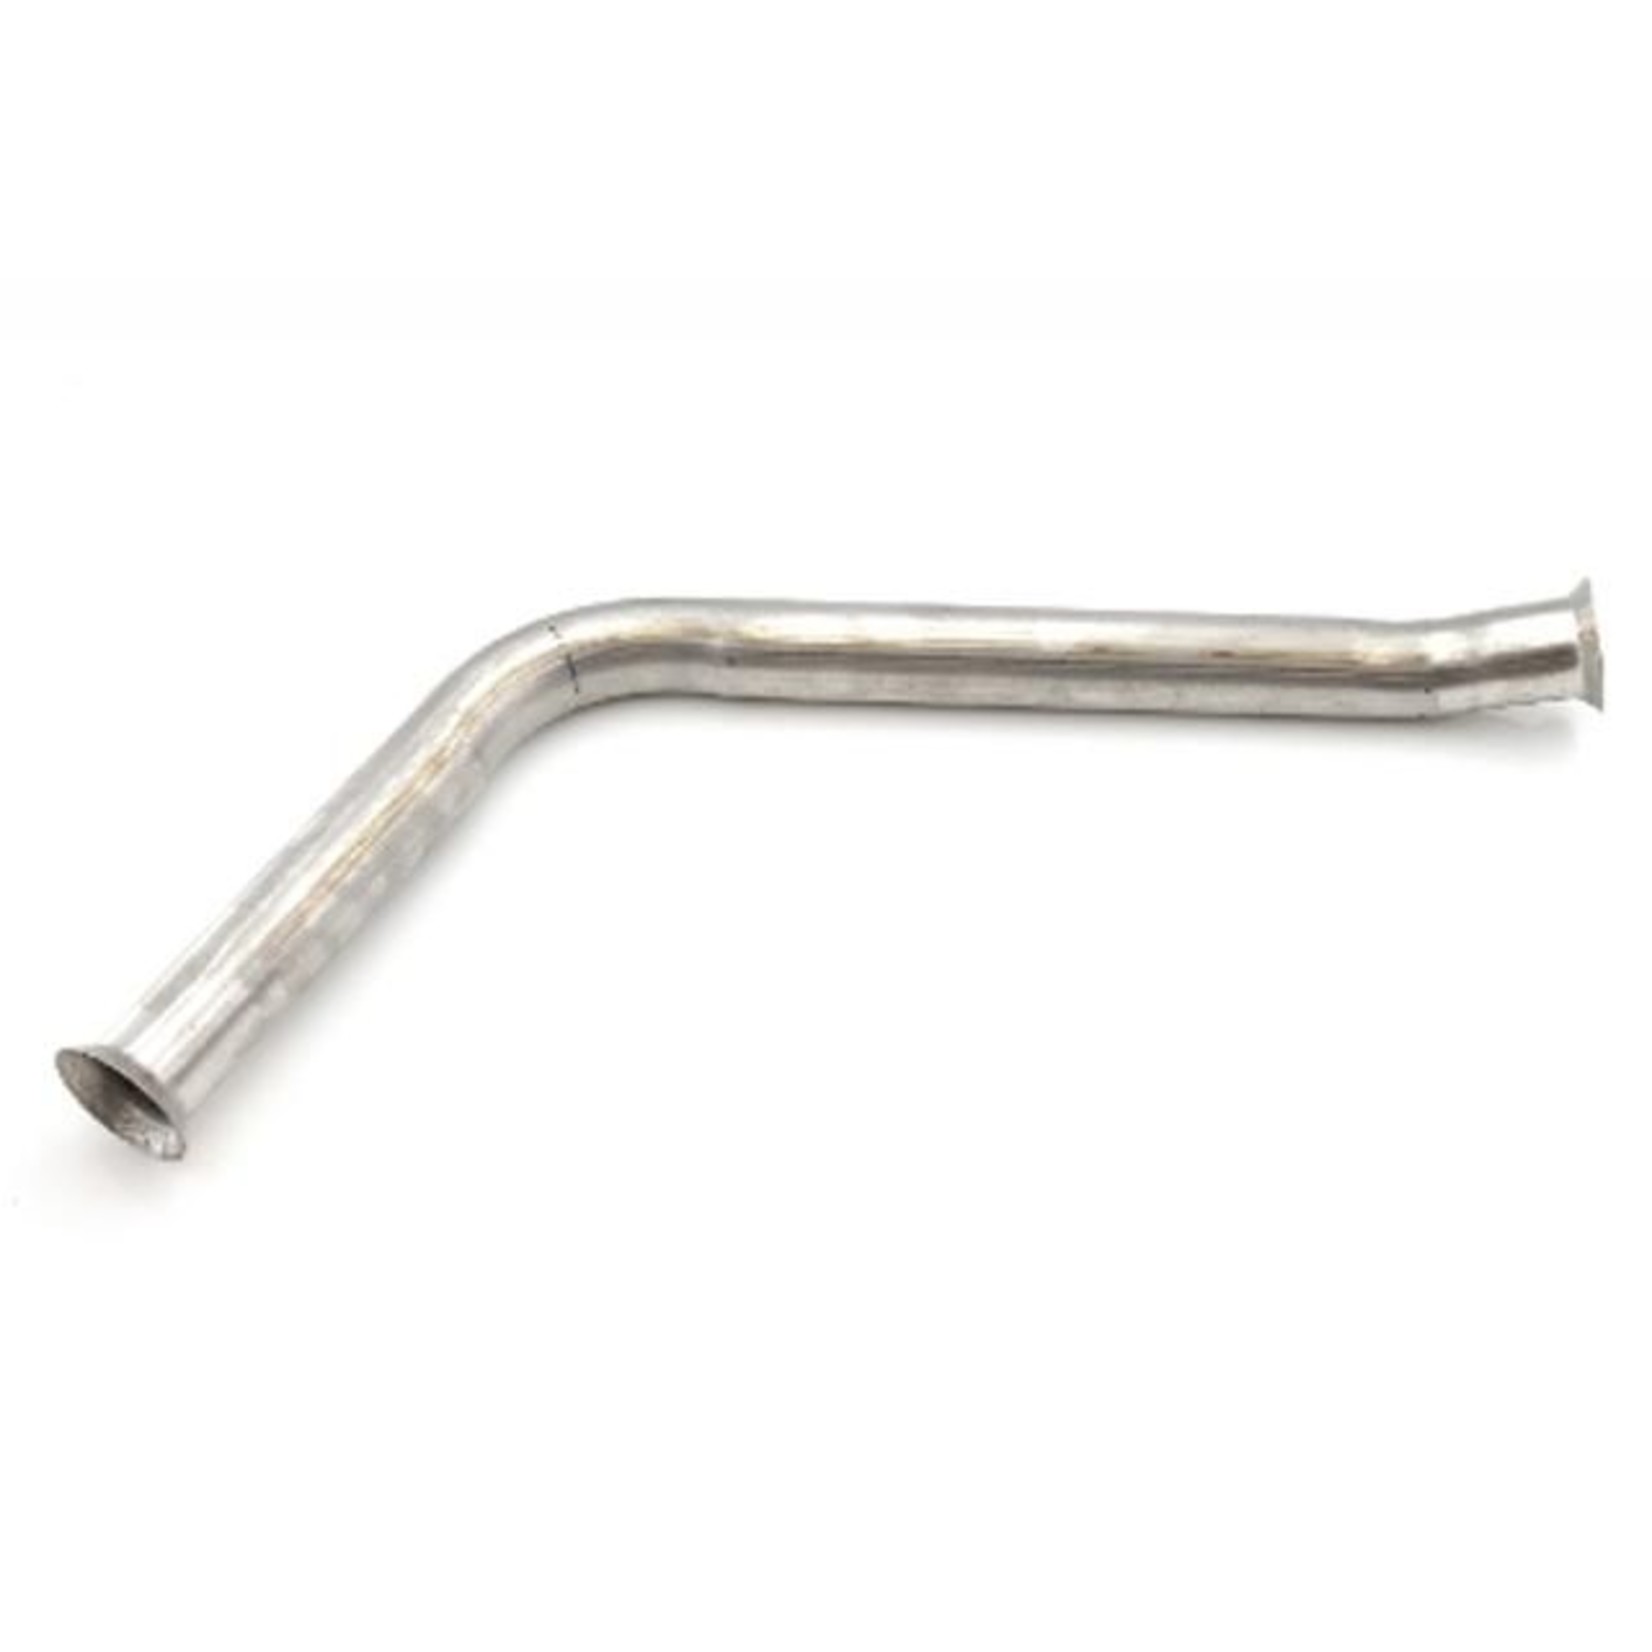 S/s front exhaust pipe Stainless Steel -61